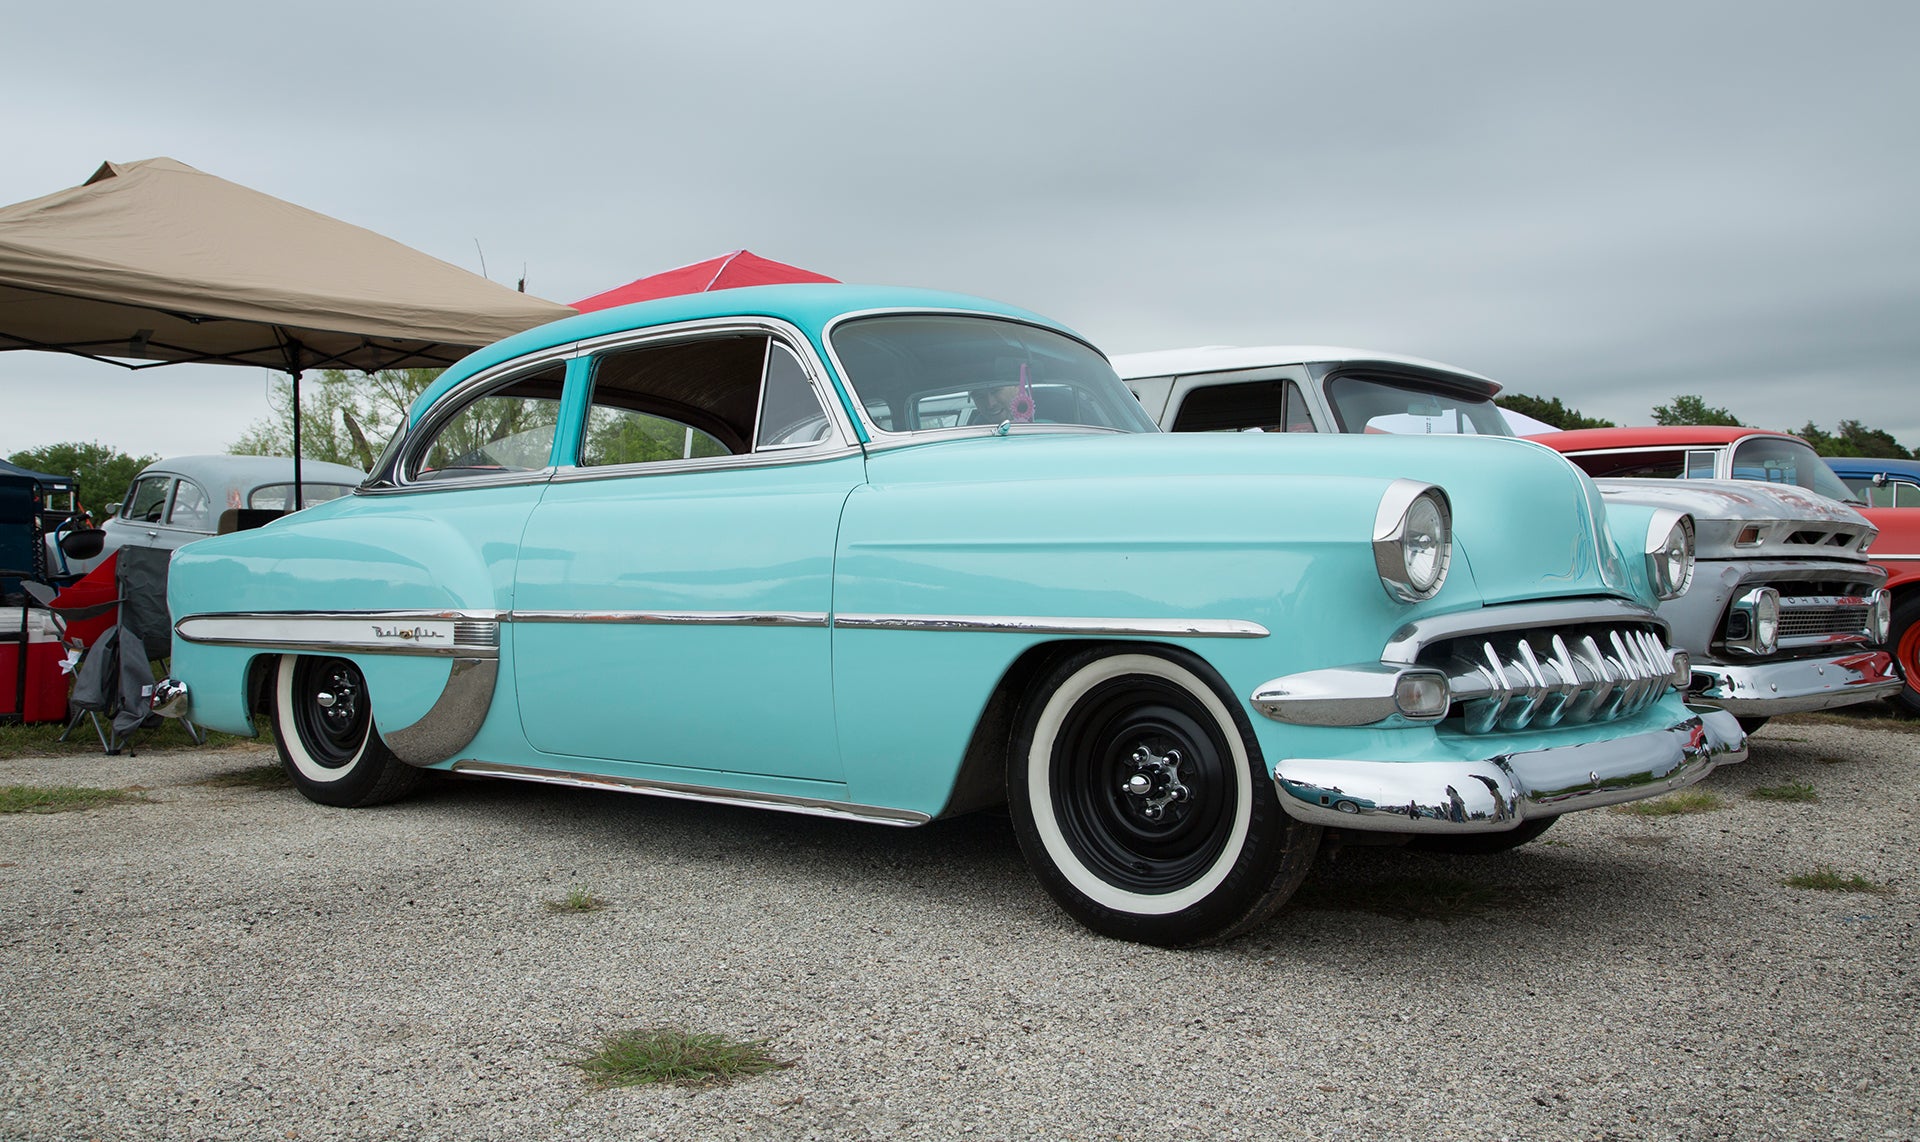 Beautiful teal colored chevrolet belair at the car show